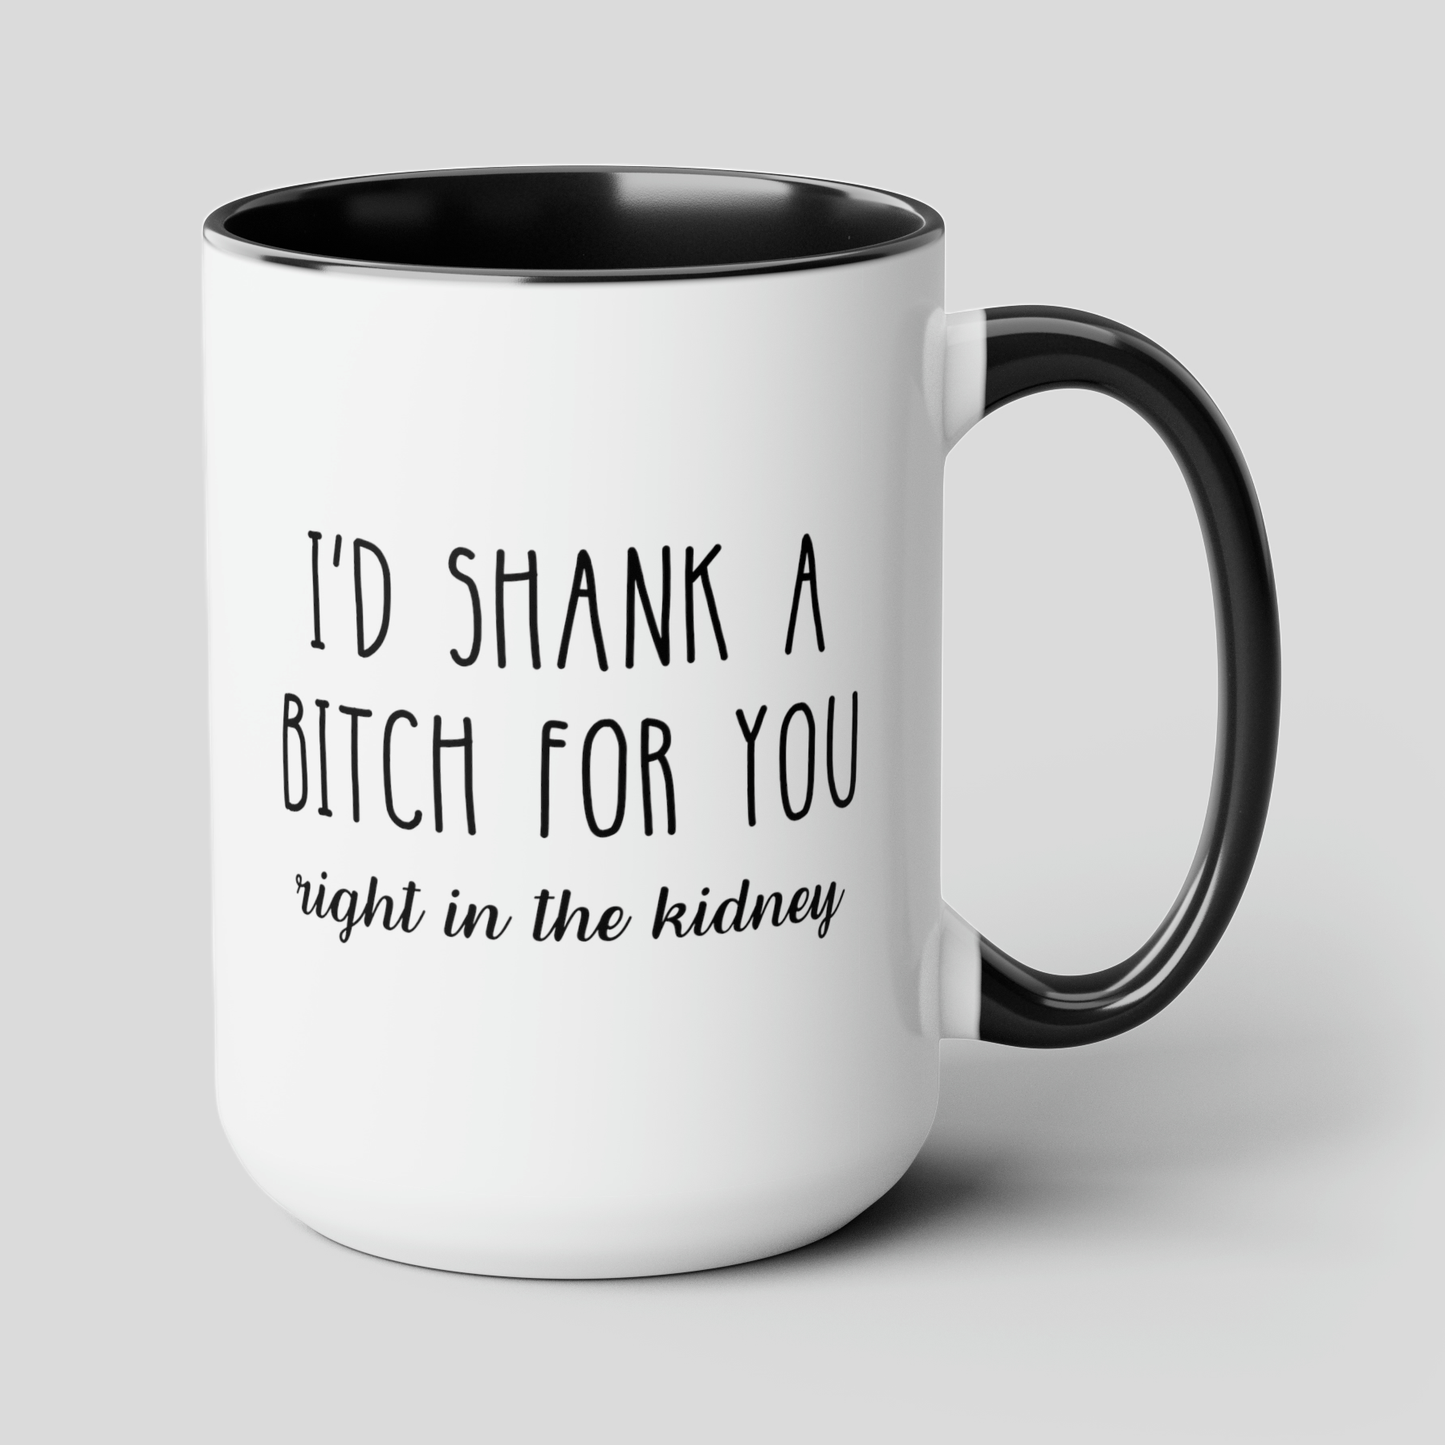 I'd Shank A Bitch For You 15oz white with black accent funny large coffee mug gift for best friend sarcastic friendship BFF dumb rude right in the kidney waveywares wavey wares wavywares wavy wares cover